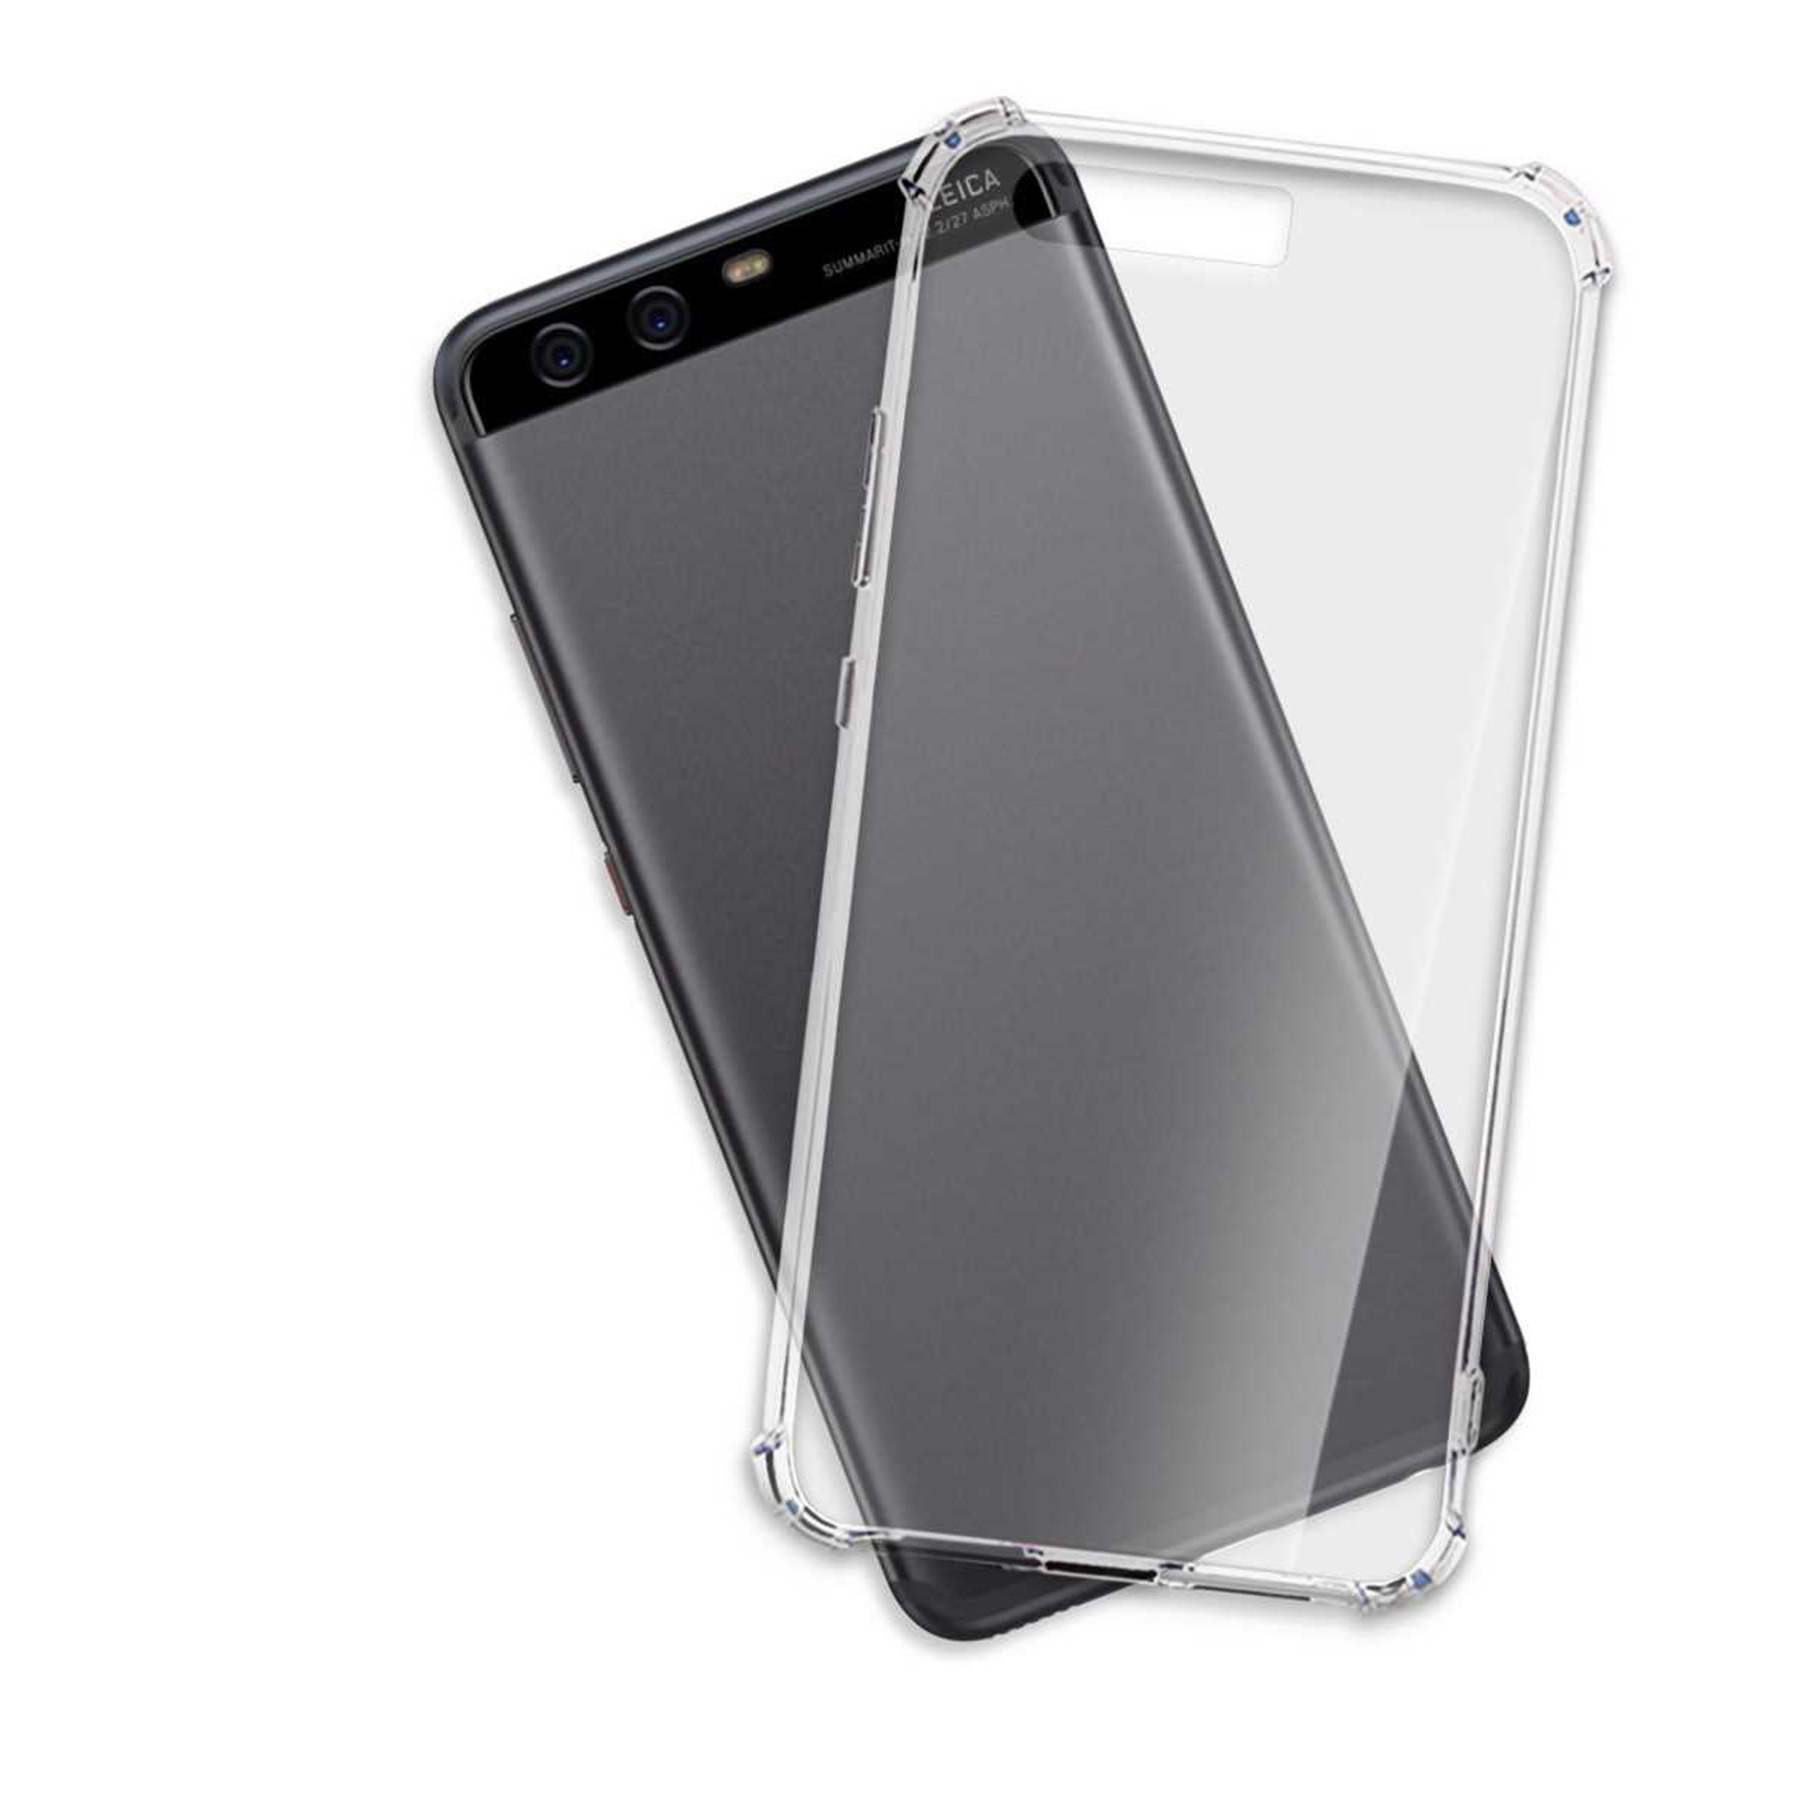 MTB MORE ENERGY Clear Armor P10, Backcover, Transparent Huawei, Case